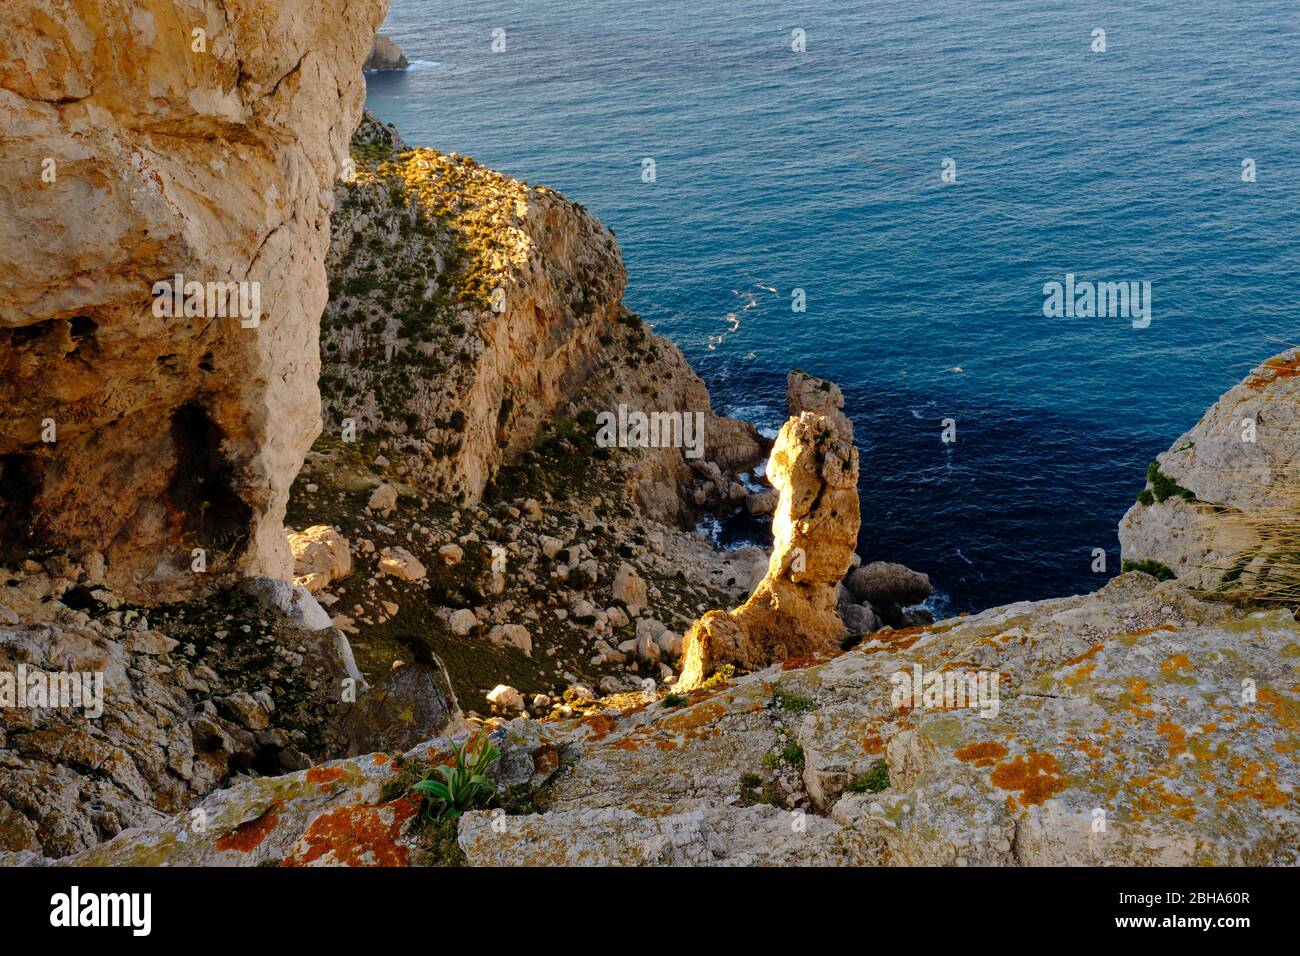 Landscape and cliffs of the peninsula Formentor from the viewpoint Mirador del Mal Pas, also called Mirador d'es Colomer, Mallorca, Balearic Islands, Spain Stock Photo